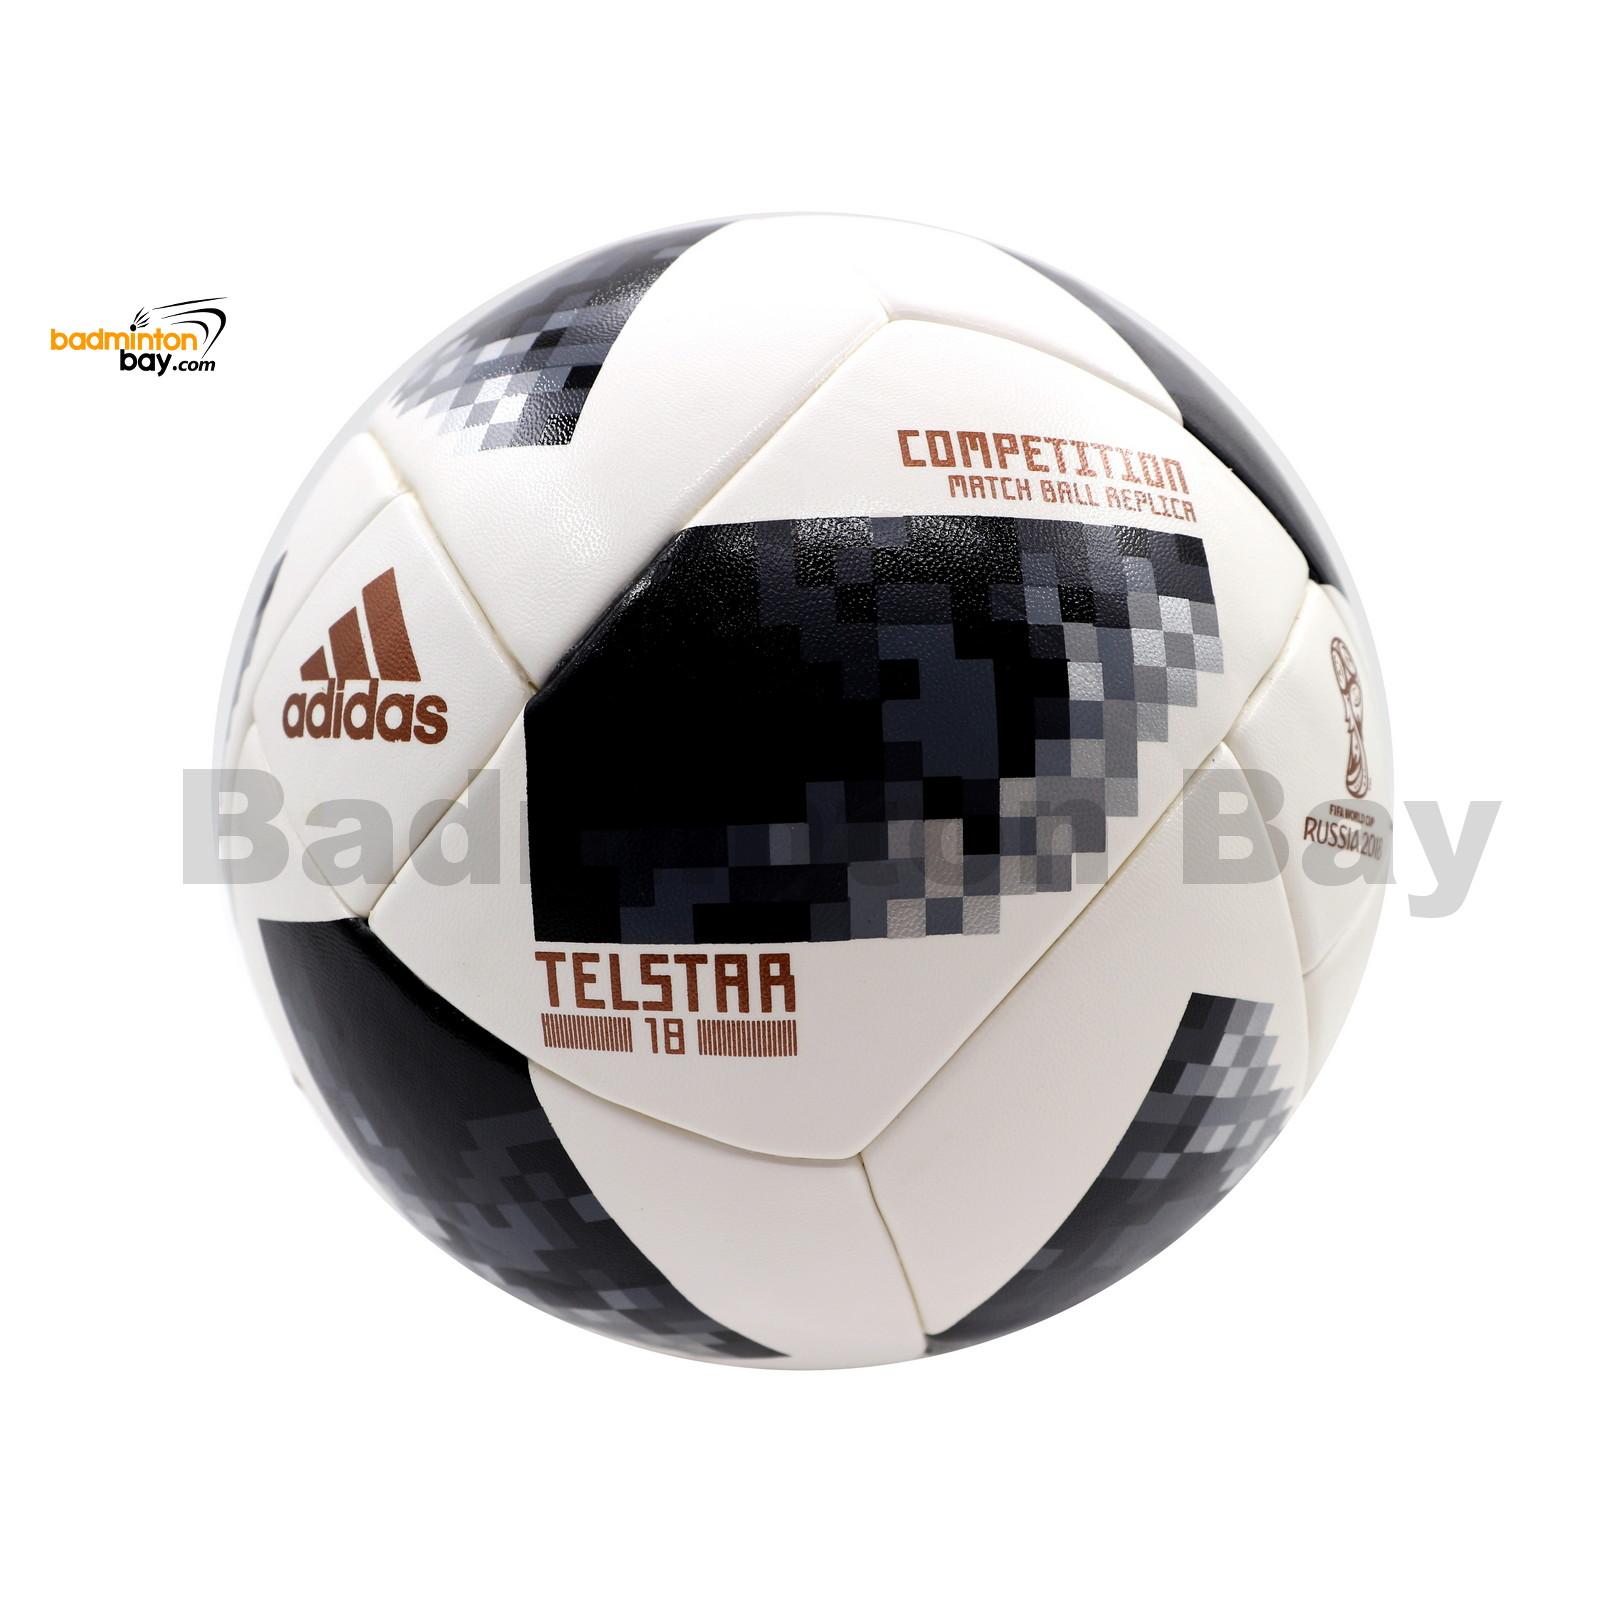 Genuine Adidas World Cup Telstar 18 Competition Ball Football Size 5 Russia